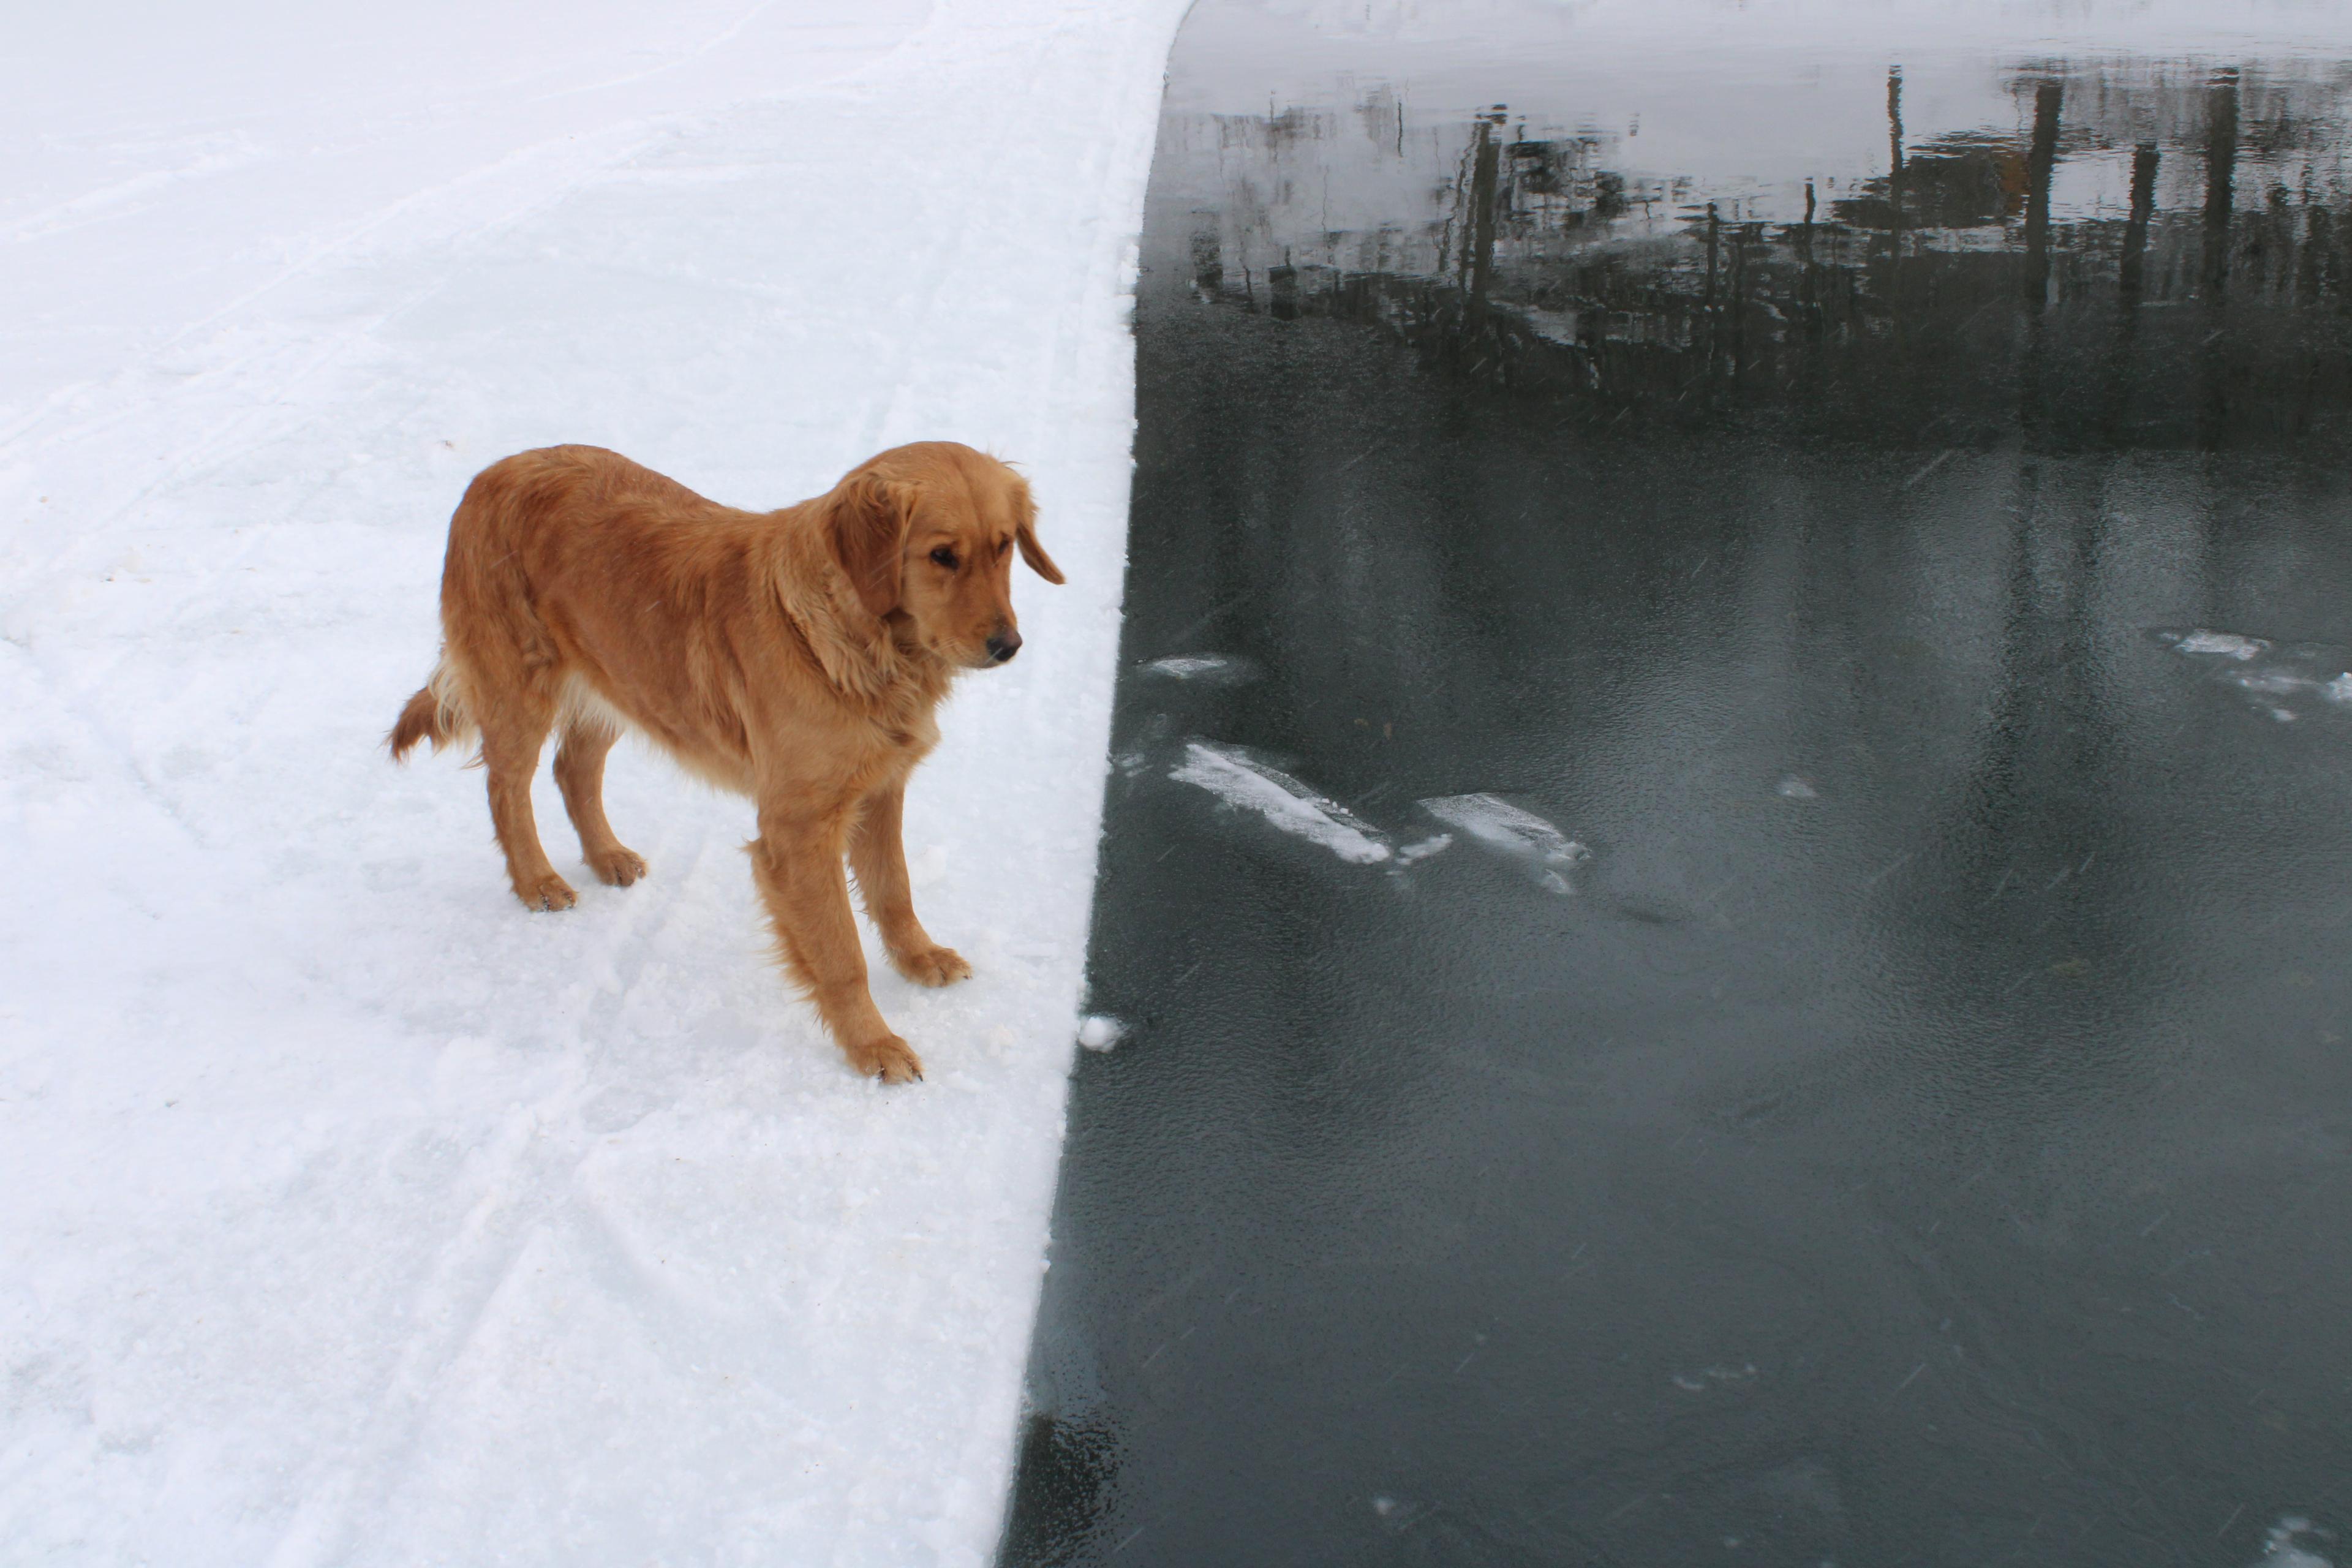 A golden retriever stands on ice and looks at open water on a pond.